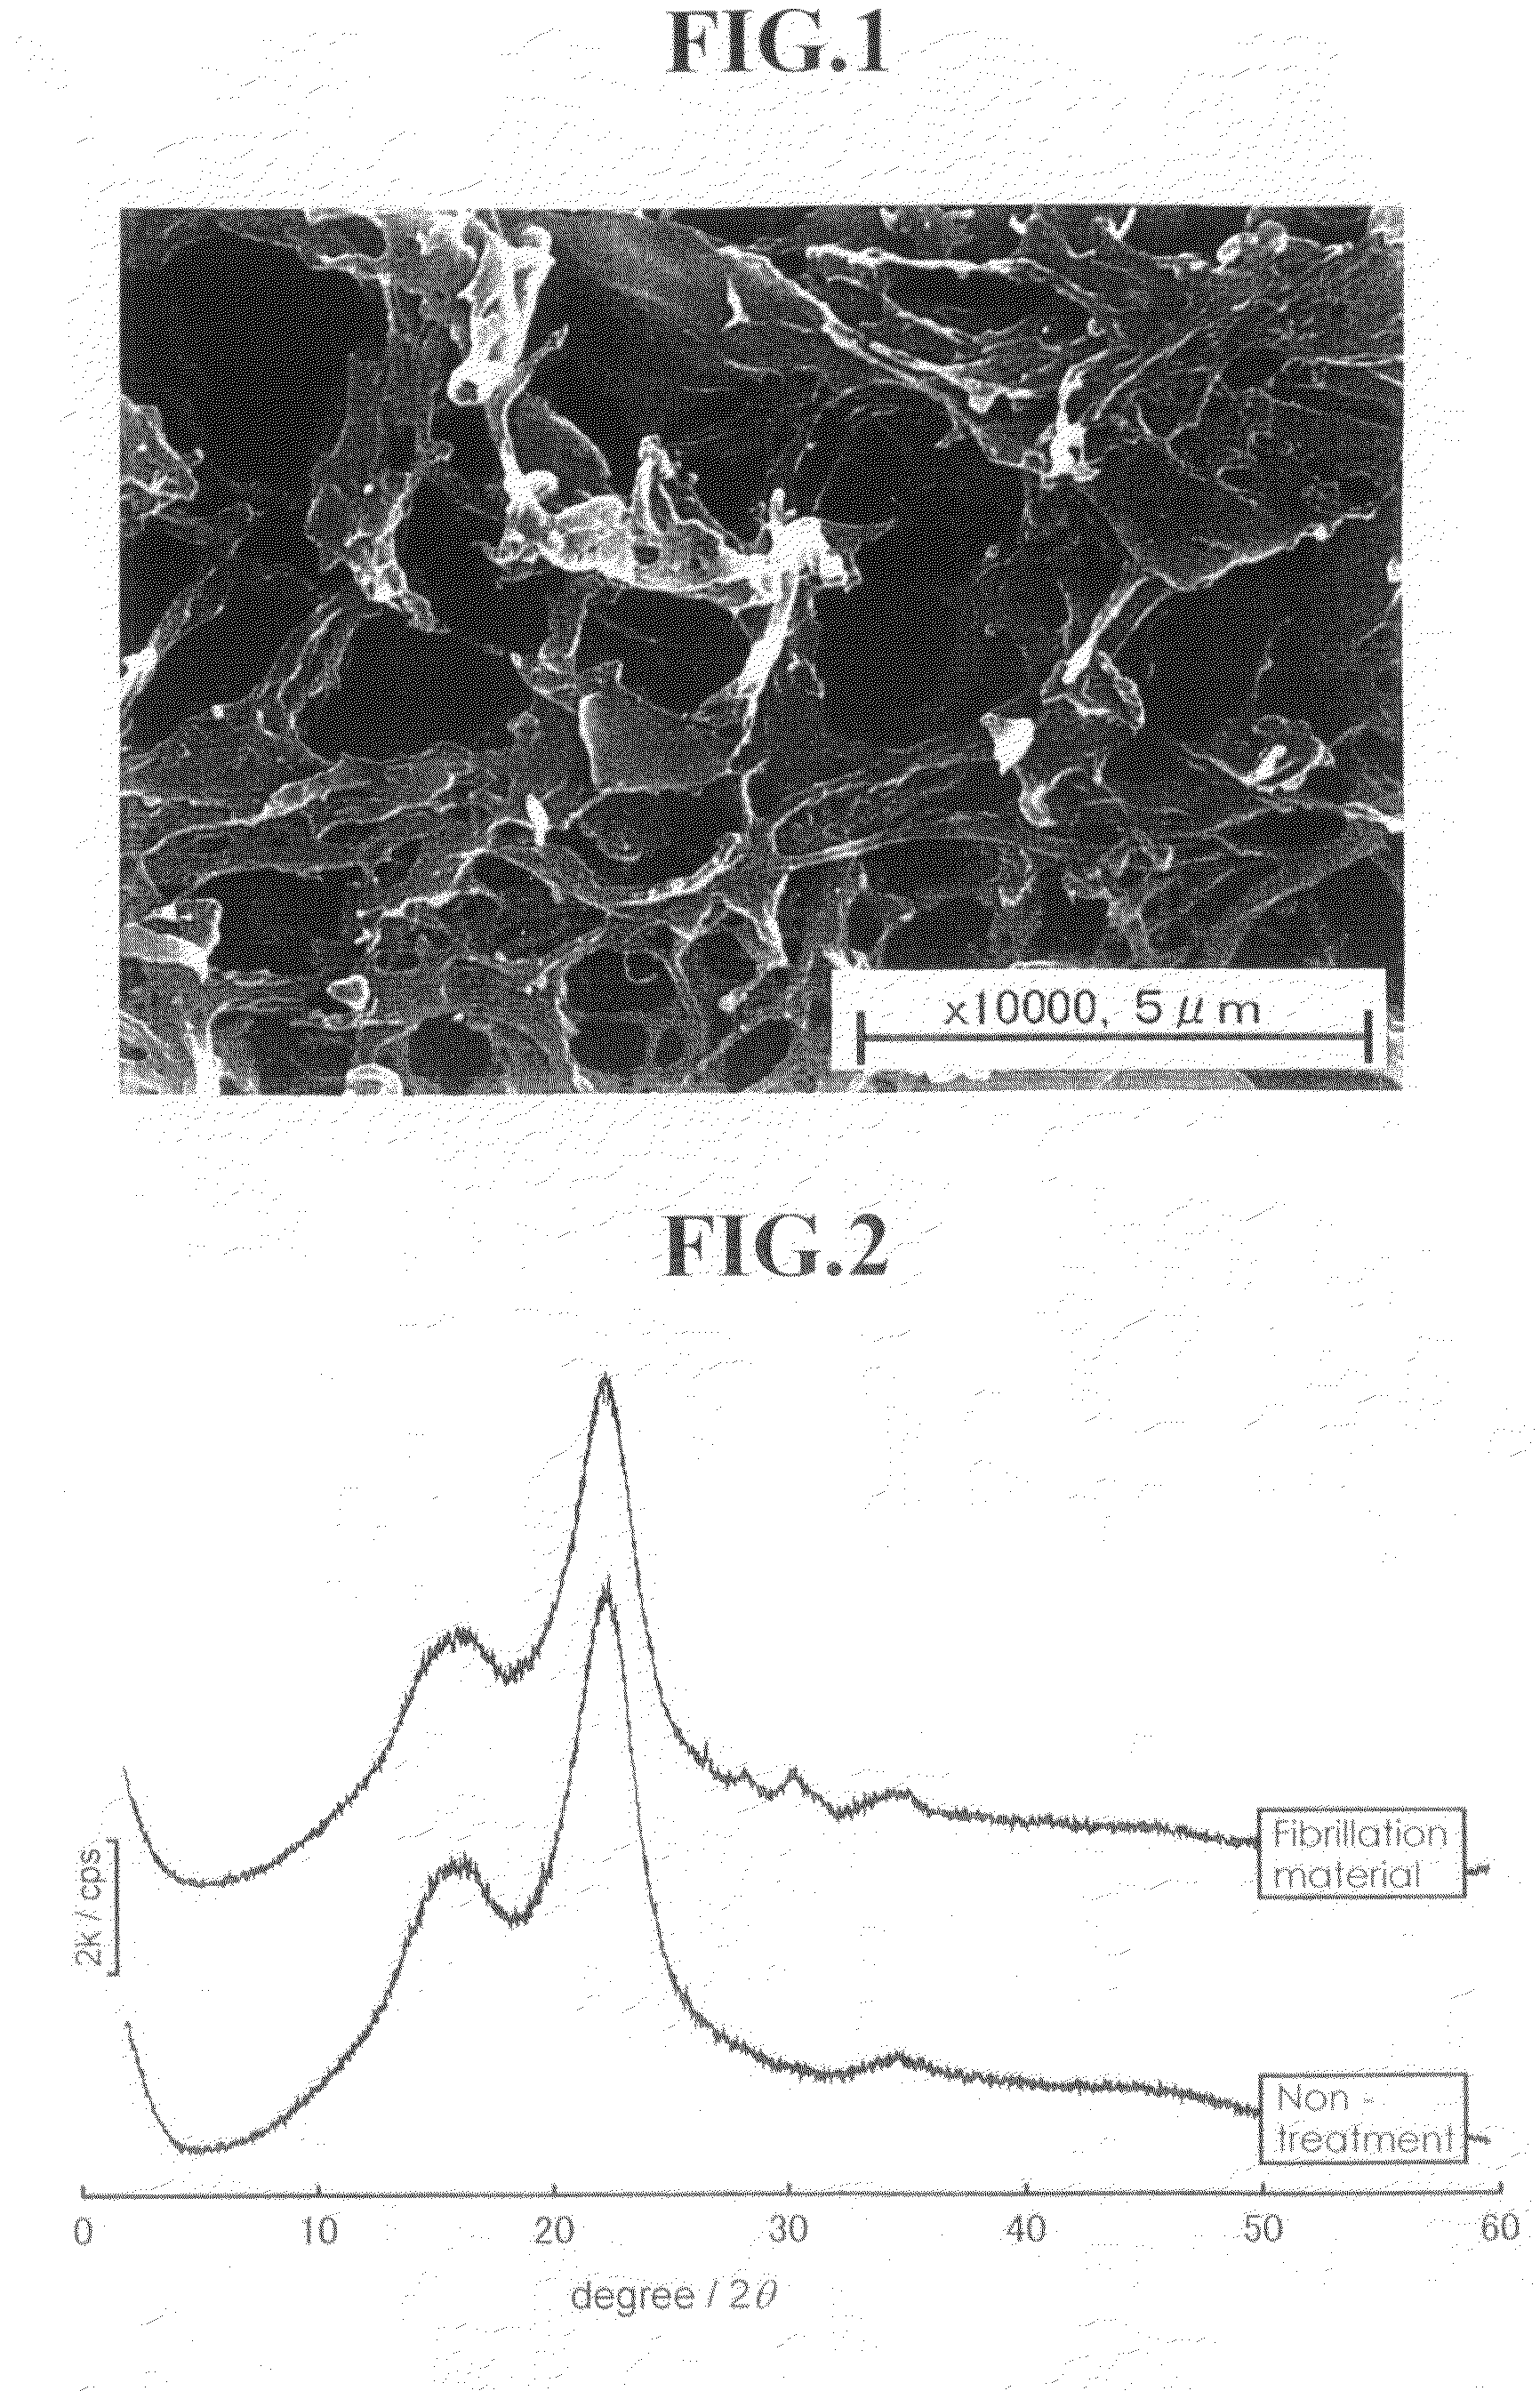 Fine fibrous cellulosic material and process for producing the same